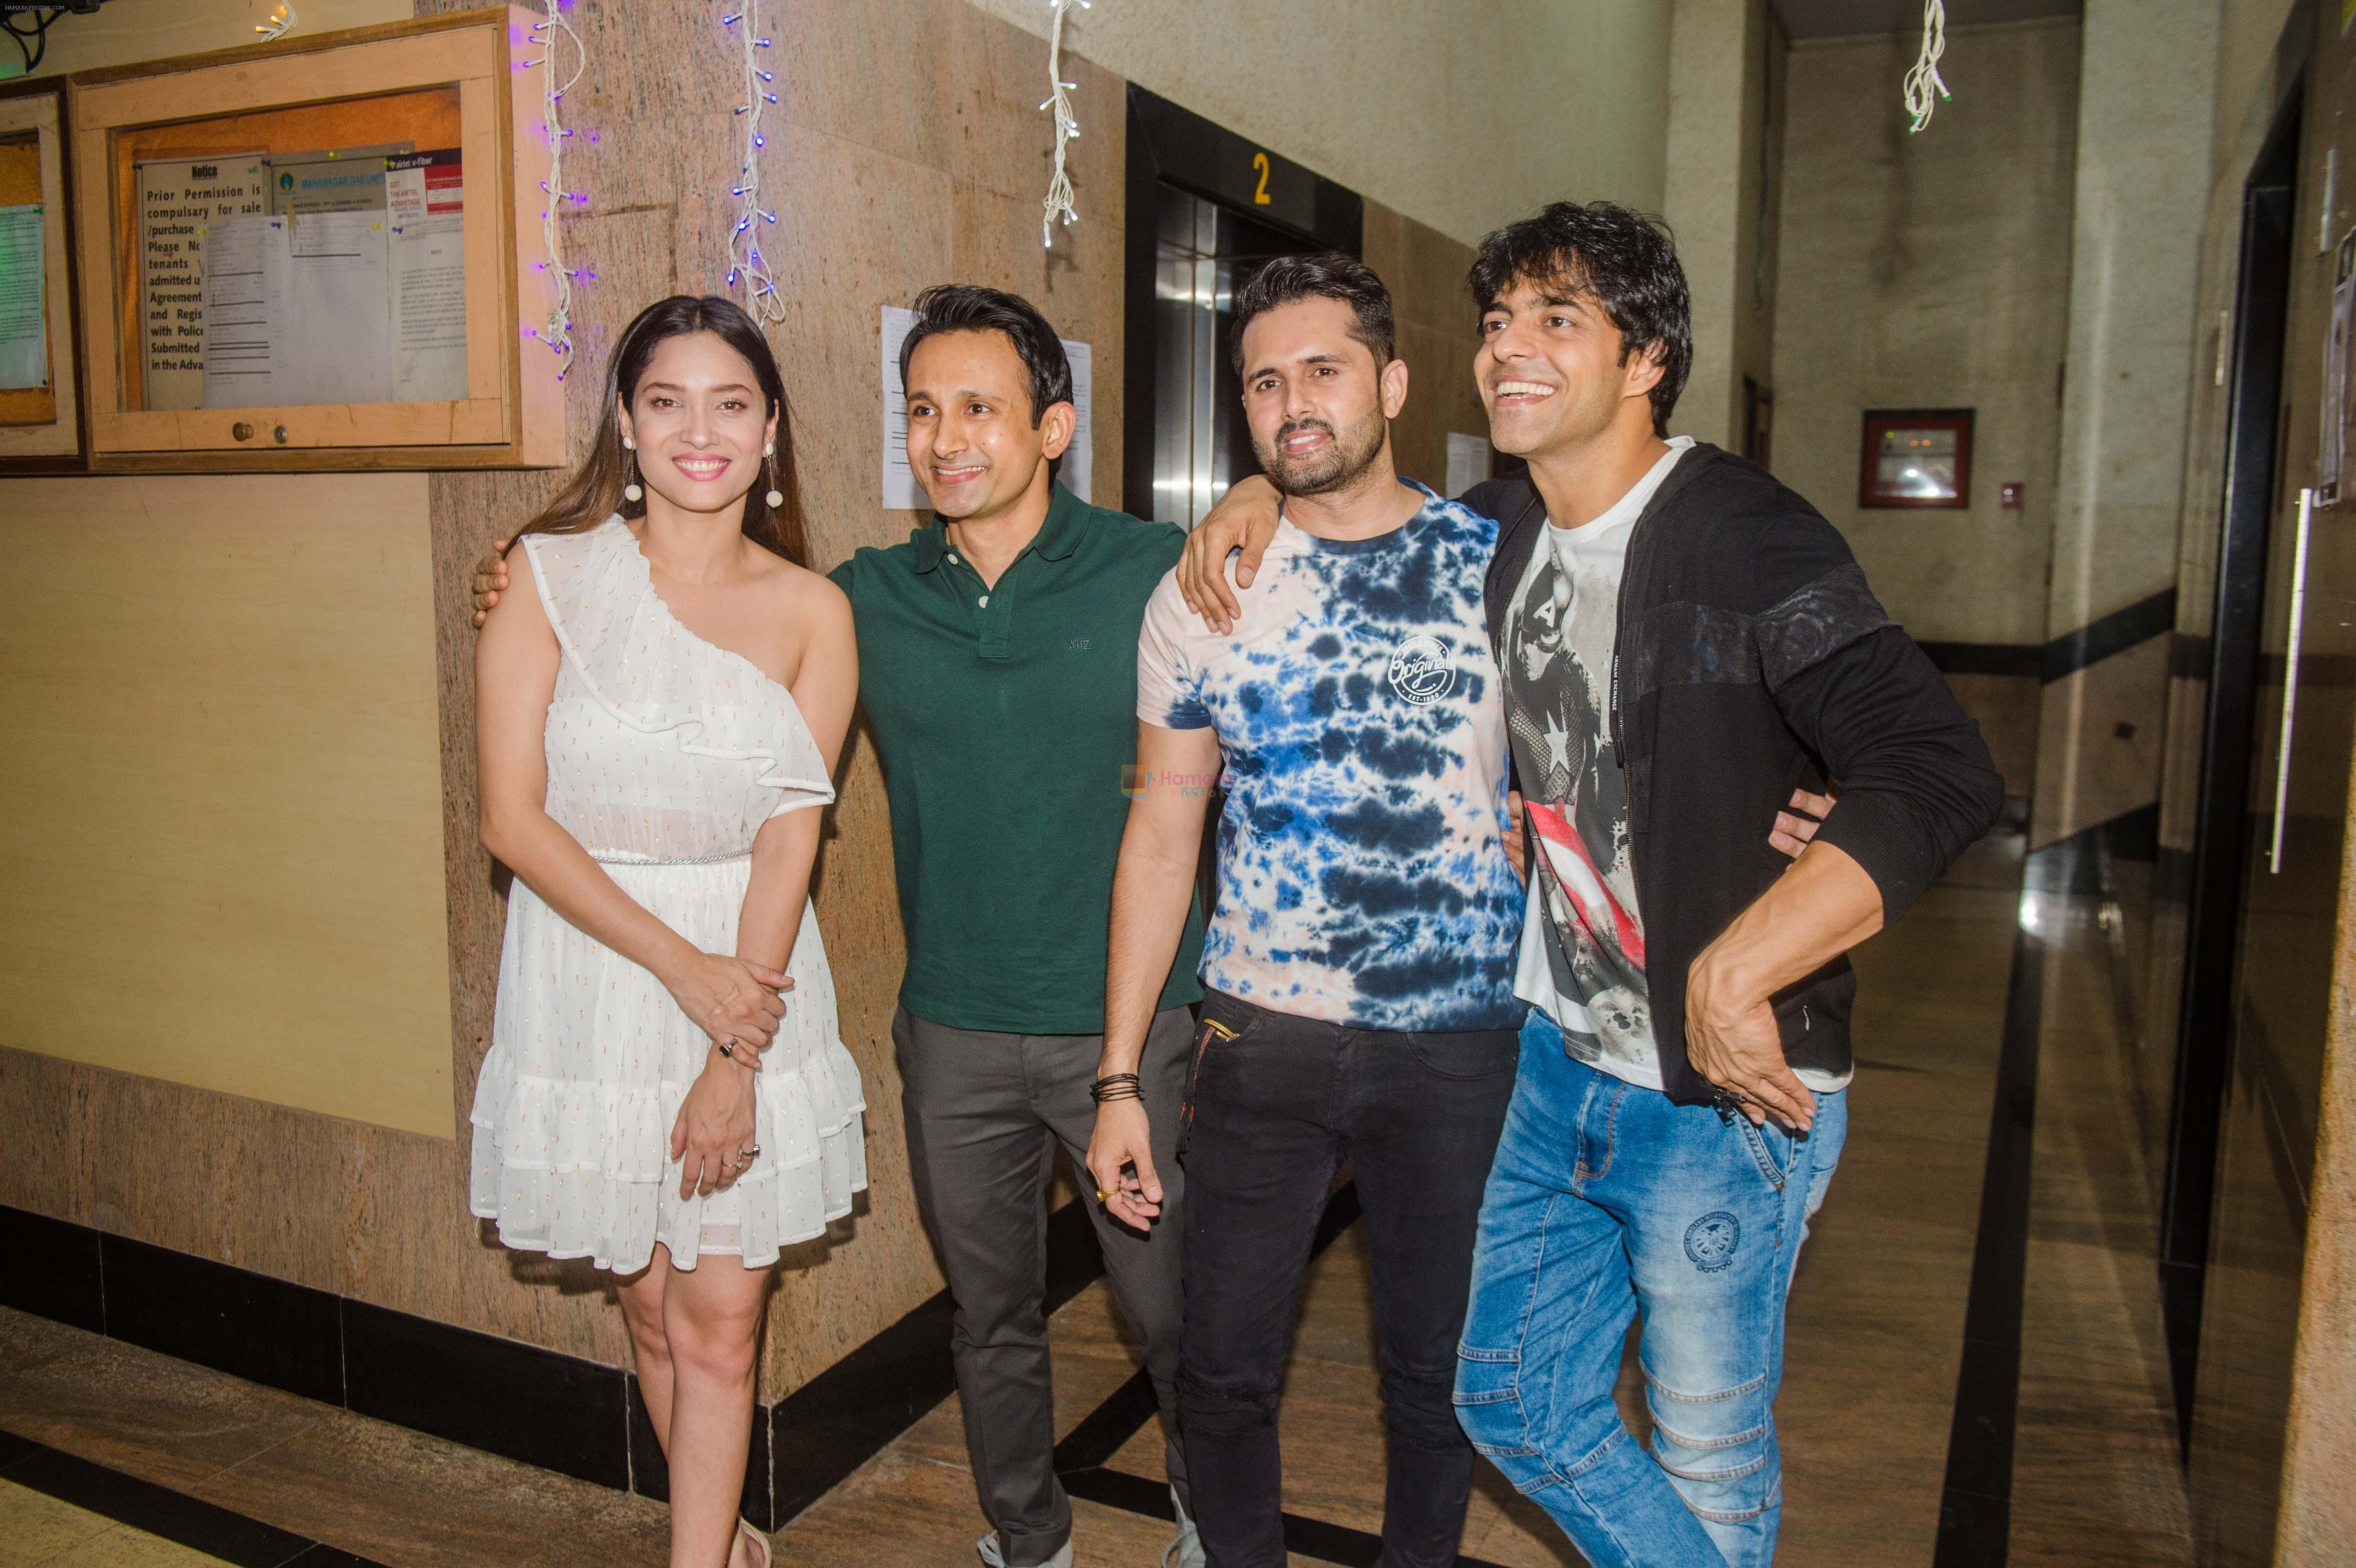 Ankita Lokhande's Reunion Bash For Her Friends on 17th Nov 2018